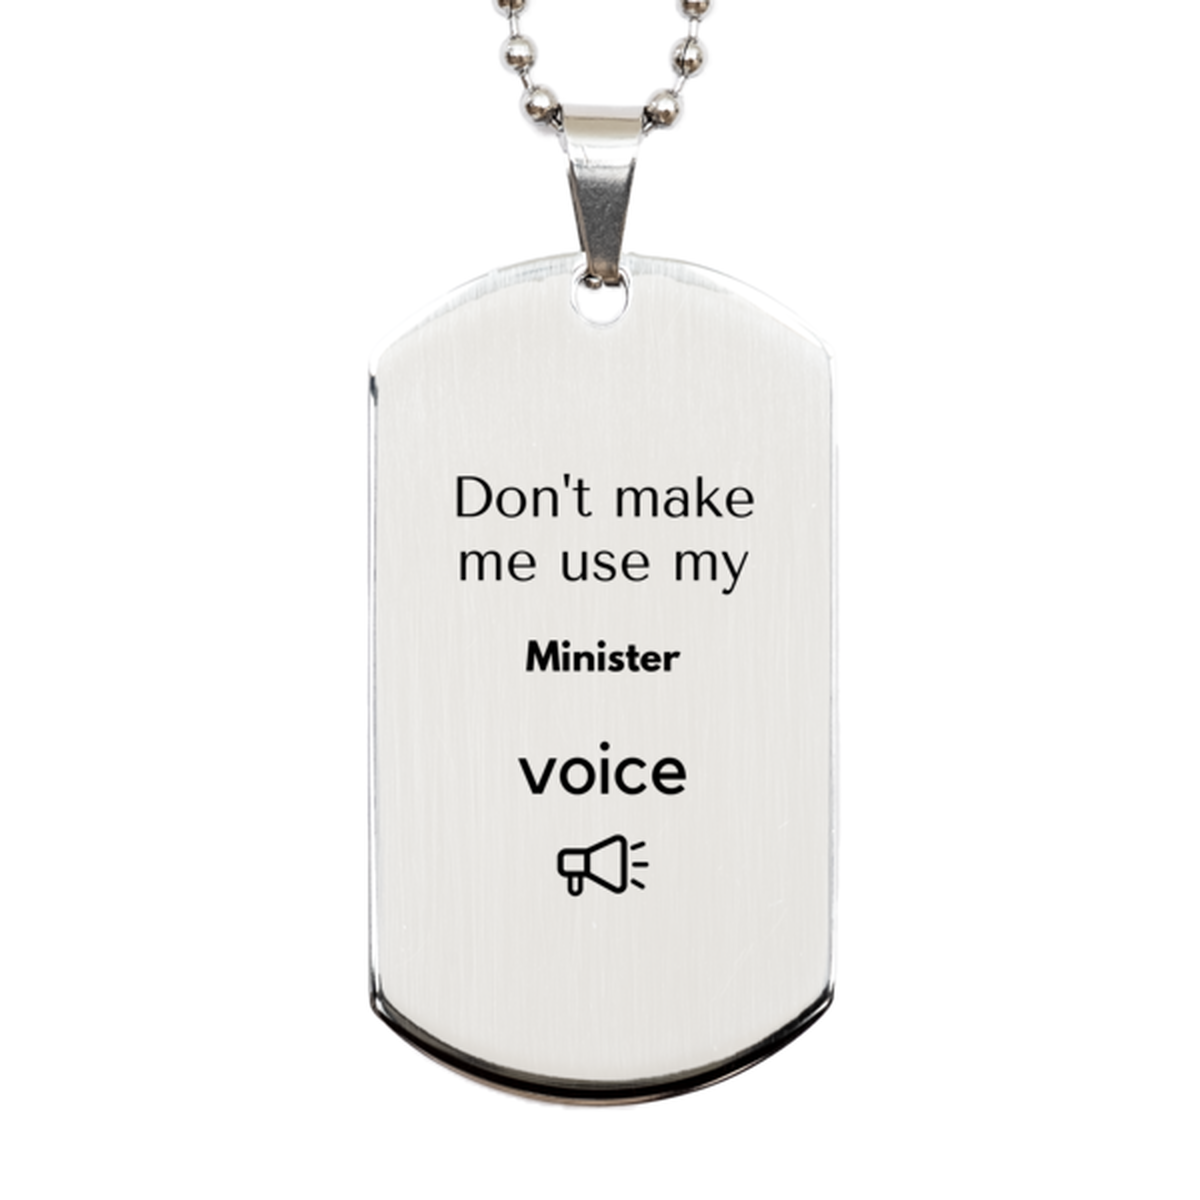 Don't make me use my Minister voice, Sarcasm Minister Gifts, Christmas Minister Silver Dog Tag Birthday Unique Gifts For Minister Coworkers, Men, Women, Colleague, Friends